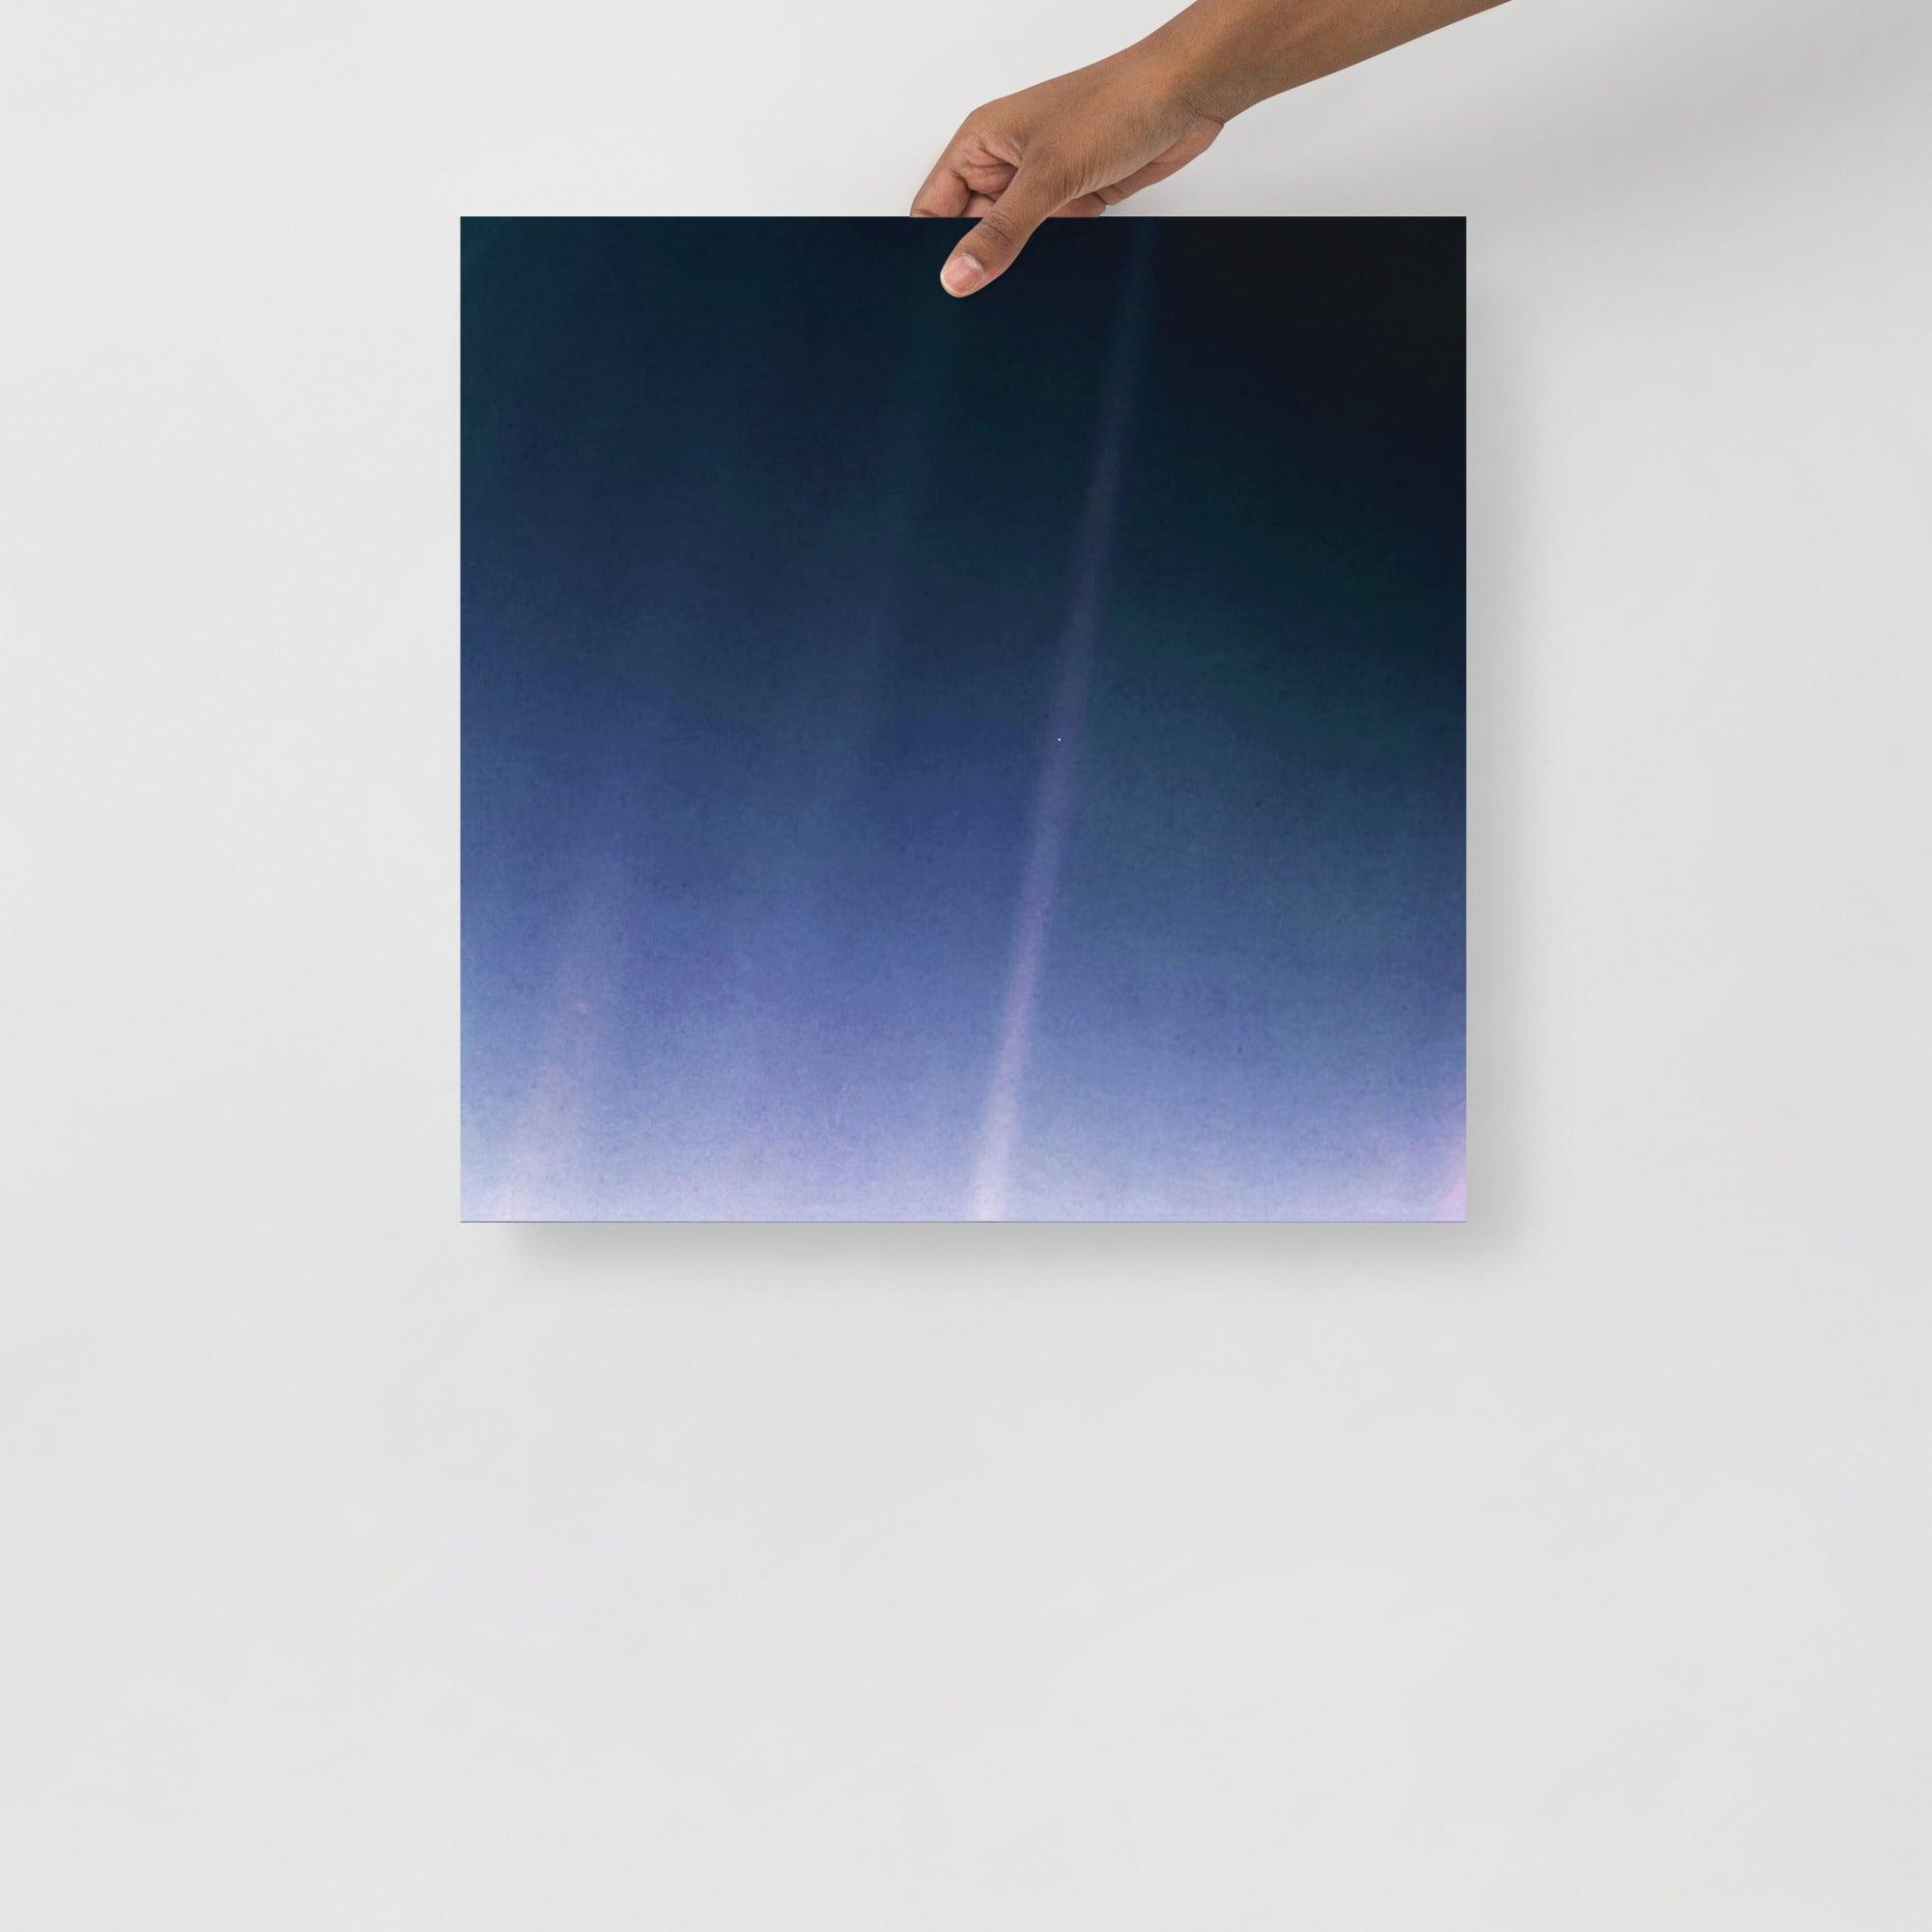 A Pale Blue Dot poster on a plain backdrop in size 18x18”.